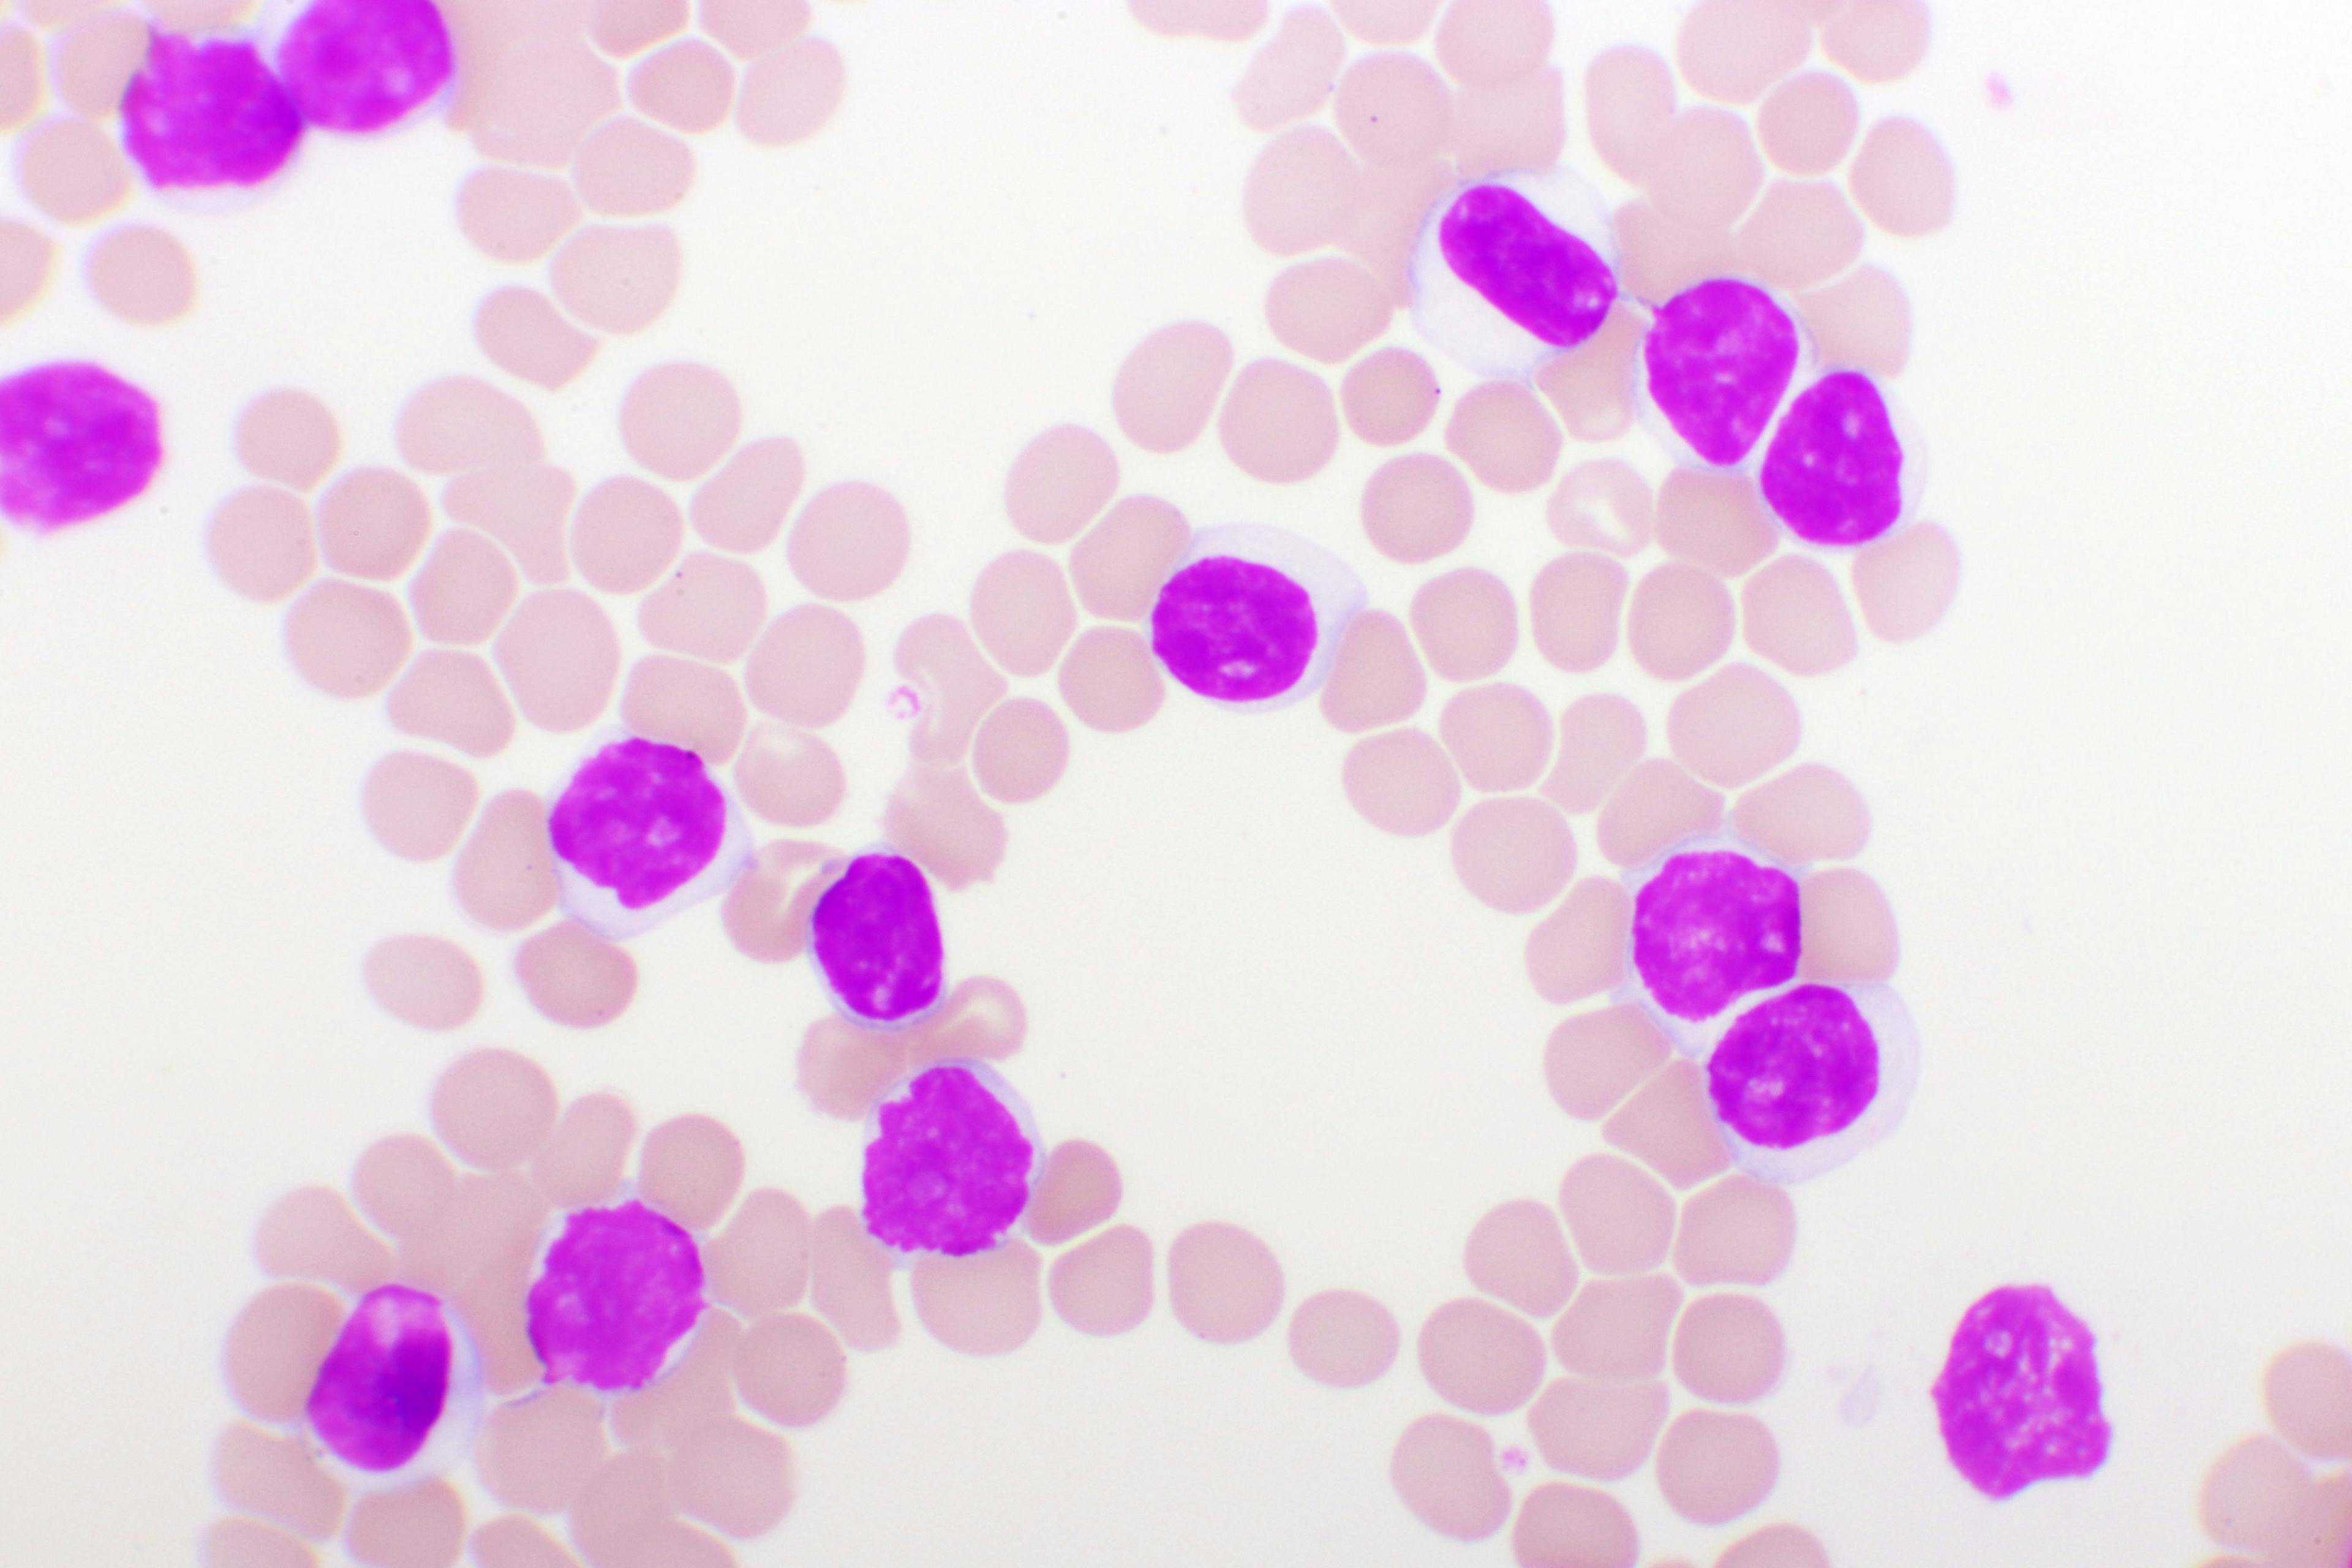 Expert Addresses Add-On Approach For the Treatment of Chronic Lymphocytic Leukemia